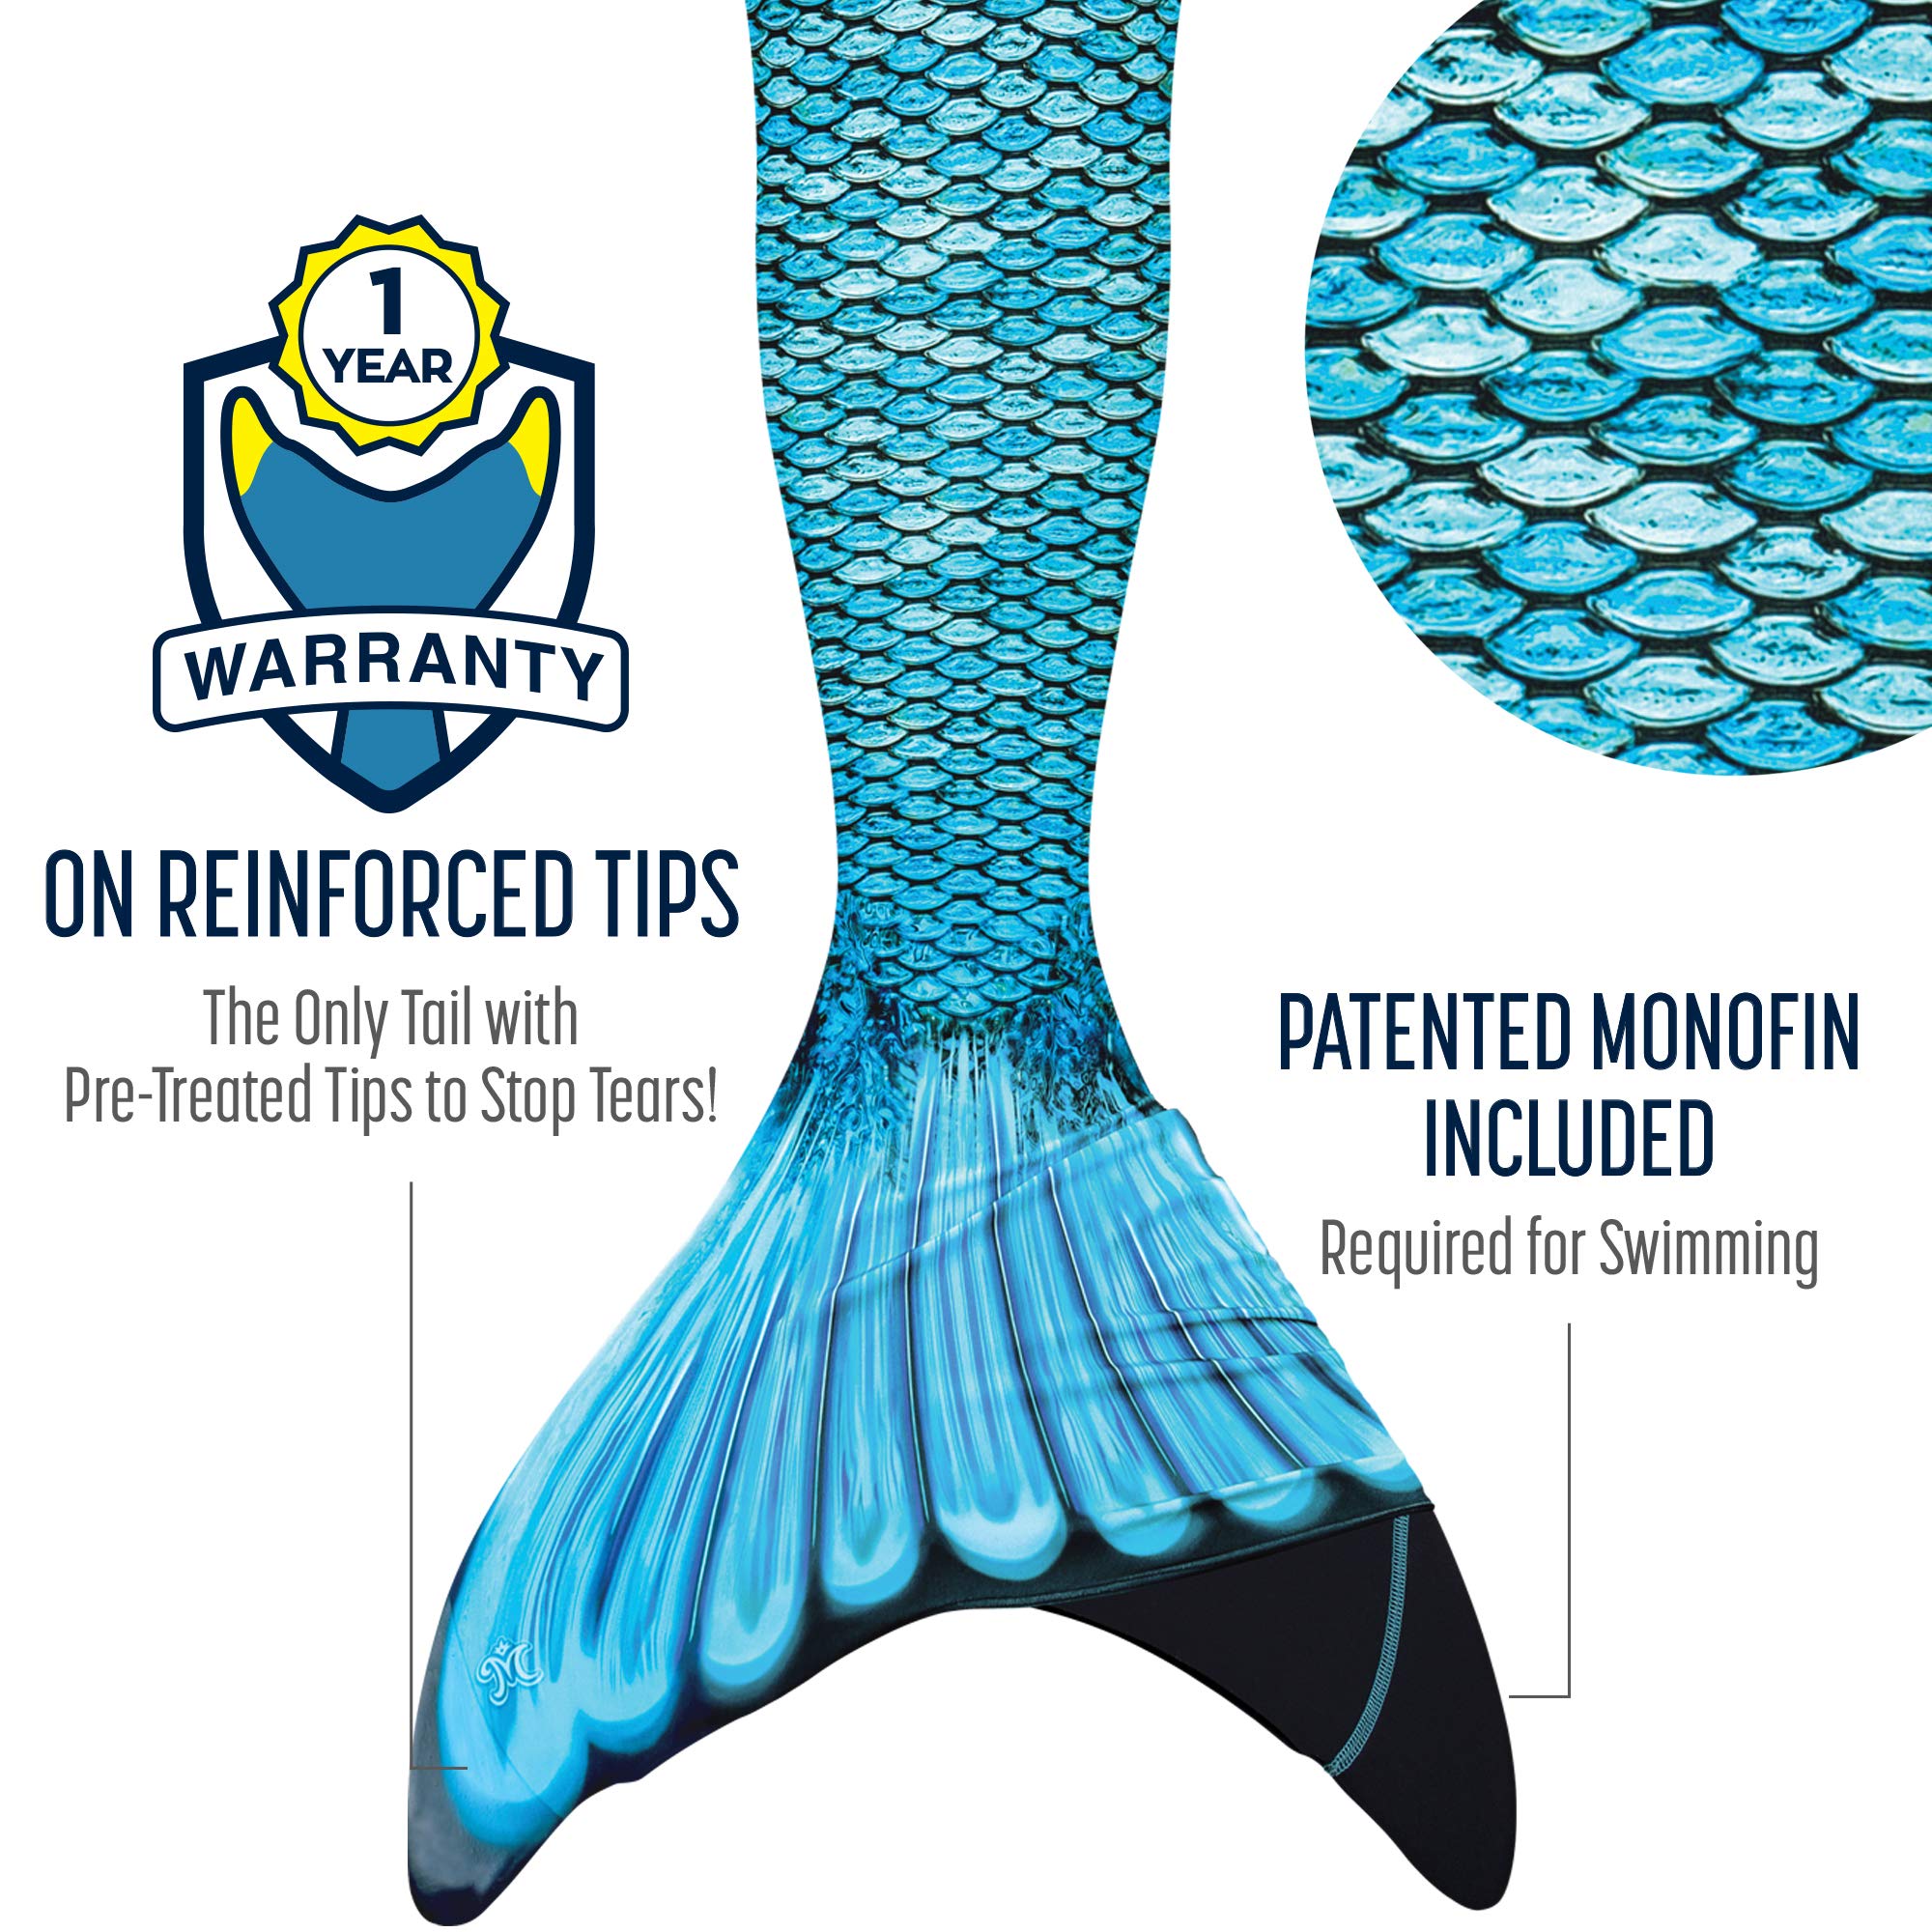 Fin Fun Mermaidens - Mermaid Tails for Swimming for Girls and Kids with Monofin